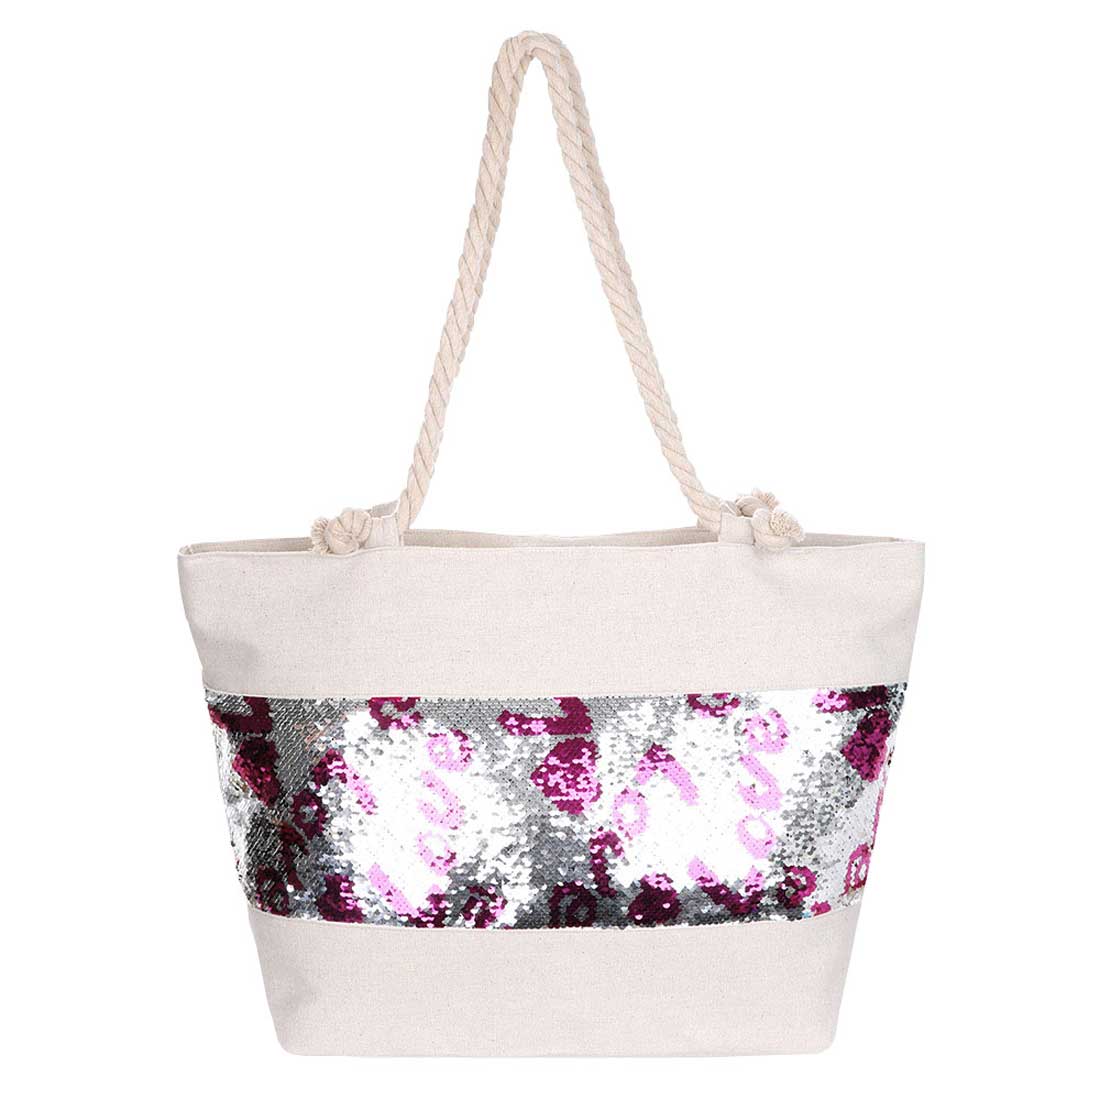 Silver Sequin Love Heart Rope Tote Beach Bag. Show your trendy side with this awesome Love Heart tote bag. This fashionable bag will be your new favorite accessory. Perfectly lightweight to carry around all day. Perfect Birthday Gift, Anniversary Gift, Mother's Day Gift, Valentine's Day Gift.